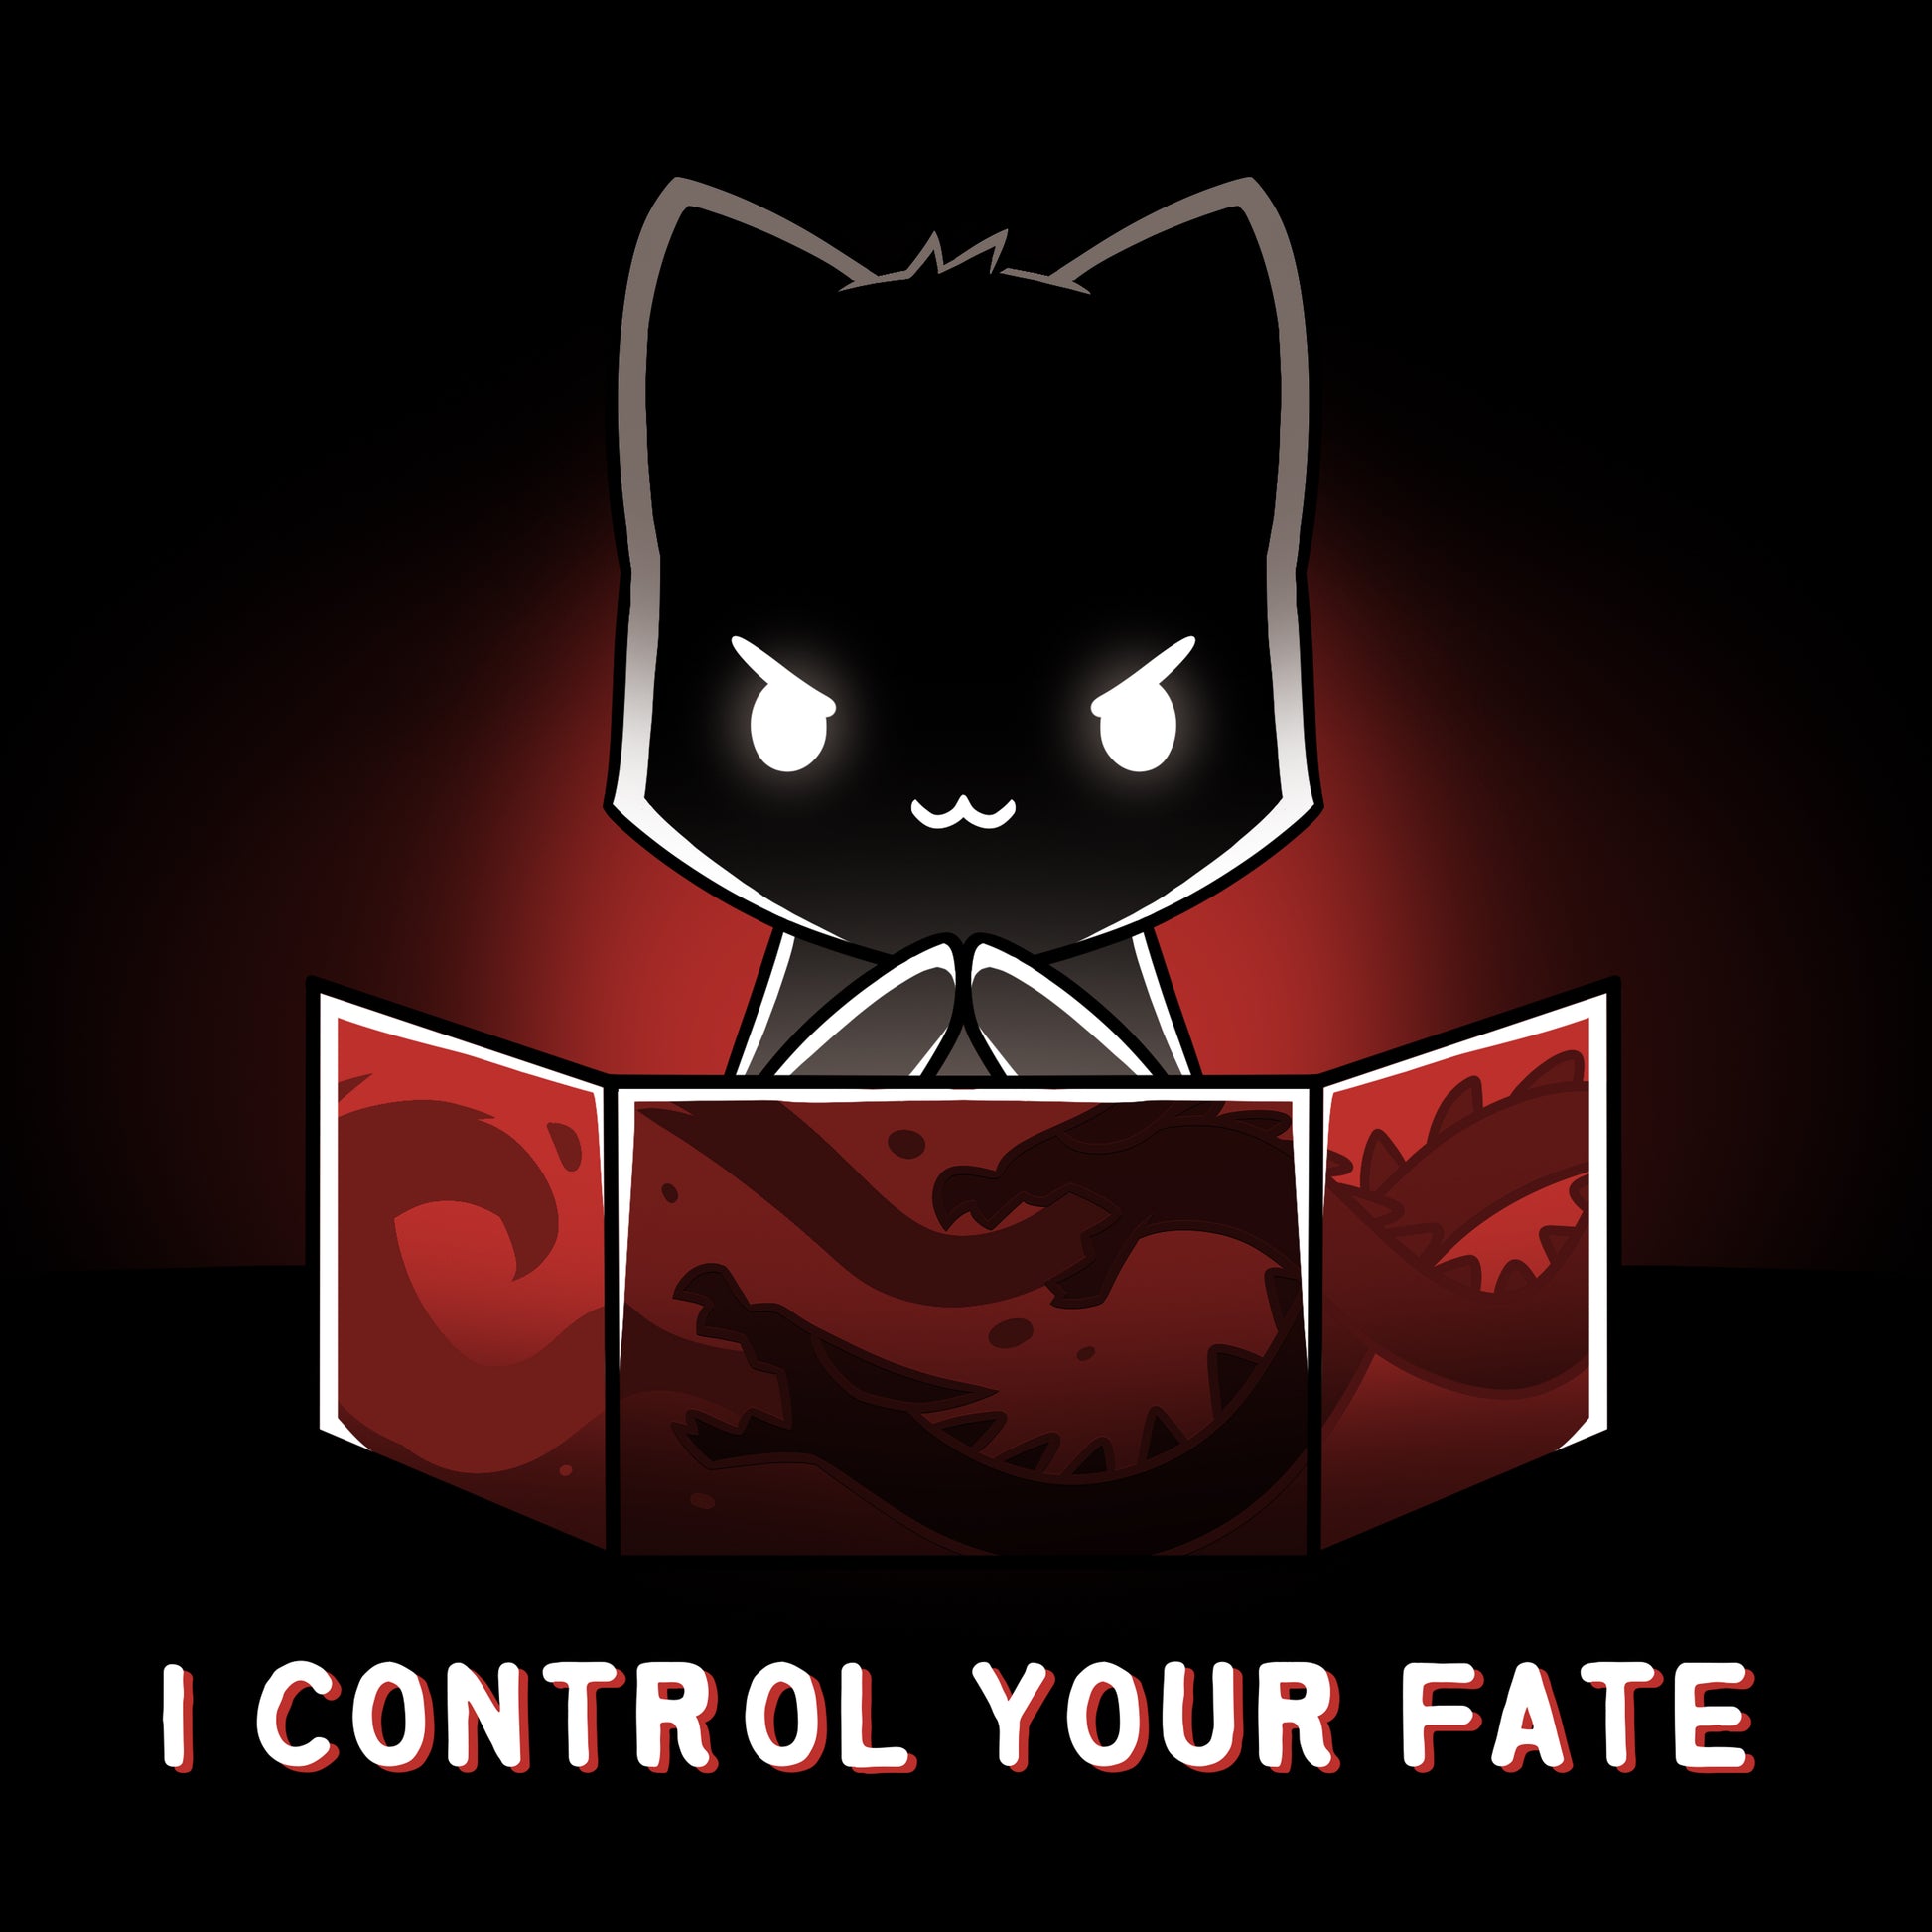 I am the ultimate tabletop game master, controlling your fate with my TeeTurtle's I Control Your Fate.